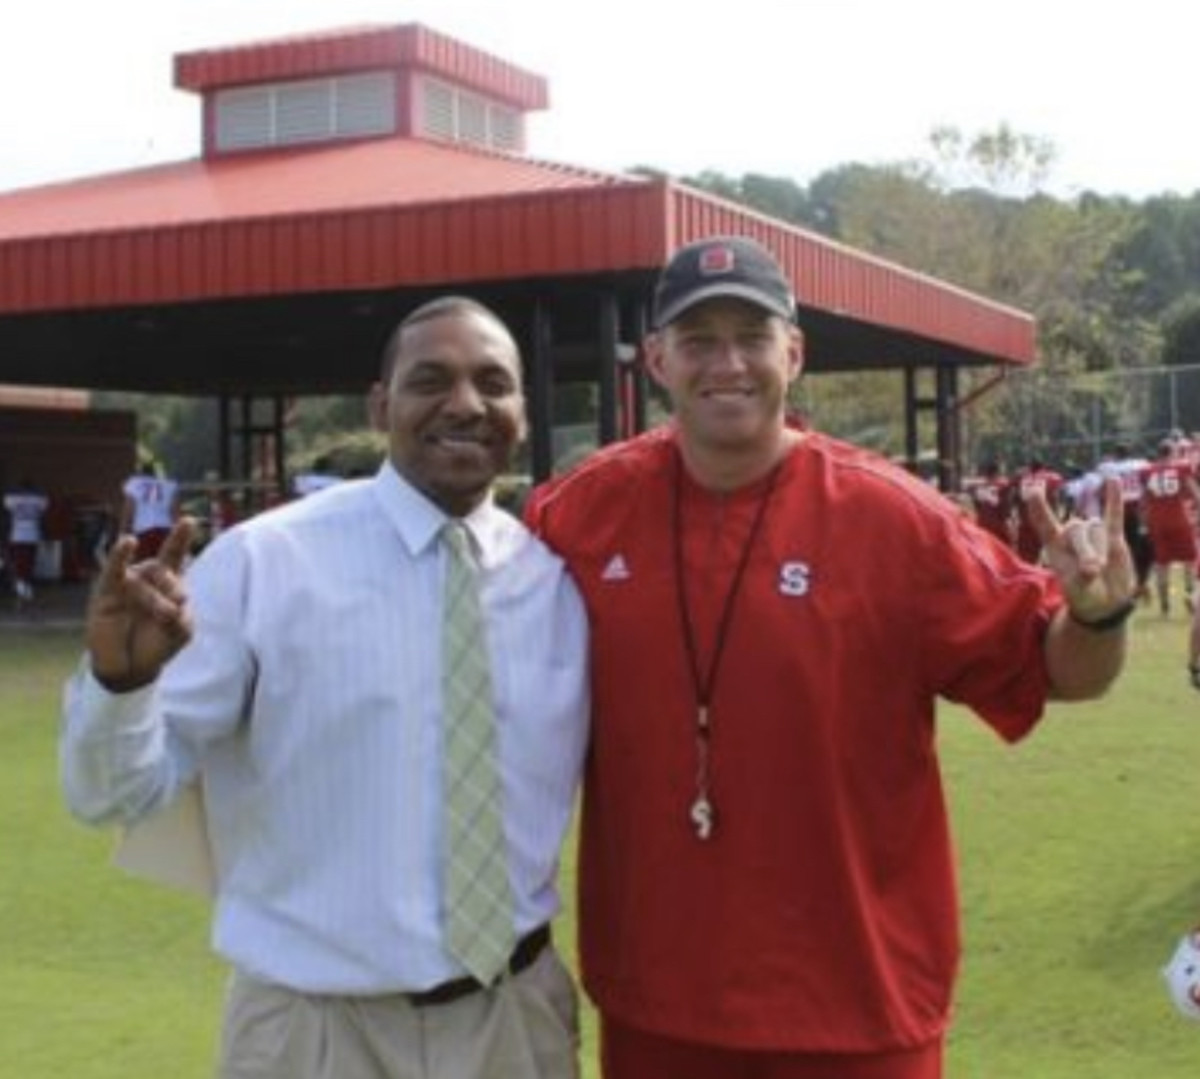 NC State alum Jamie Barnette remains active in football and supports the Wolfpack. In 2013, he stopped by the practice field to support his alma mater in Dave Doeren's first season as head coach of NCSU.